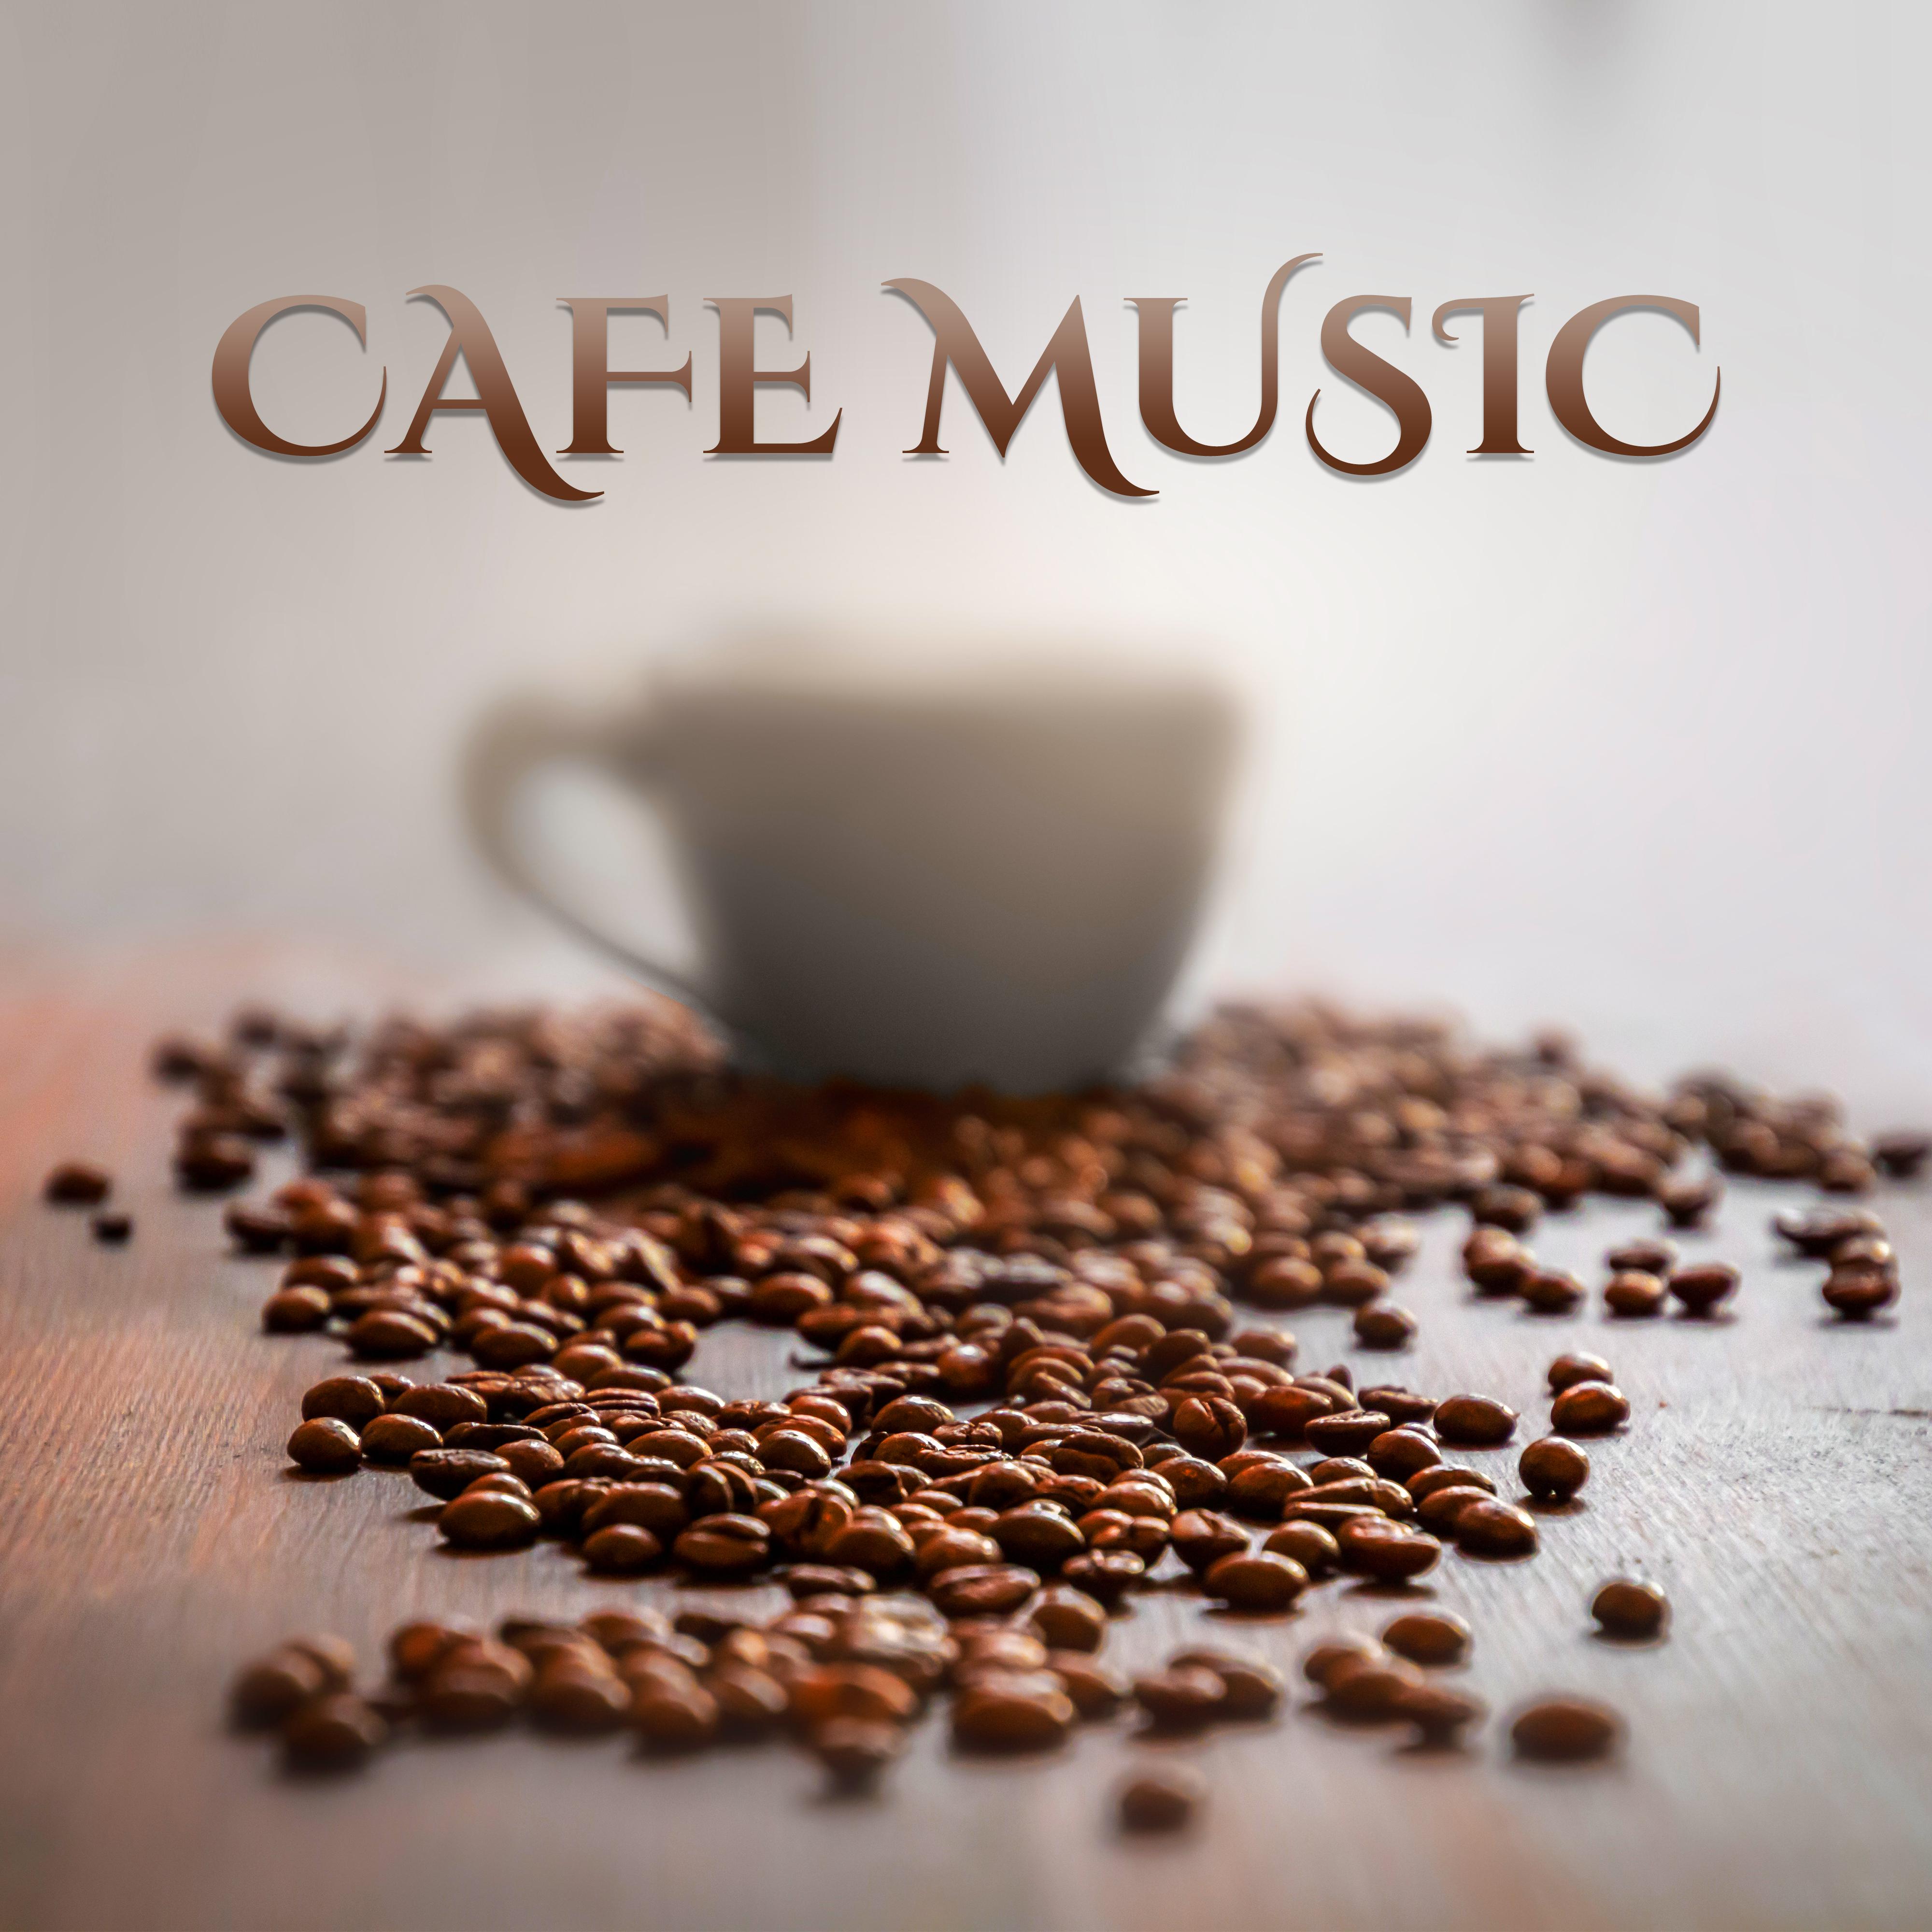 Cafe Music  Instrumental Jazz, Piano Ambient, Jazz Inspirations, Cafe Background Music